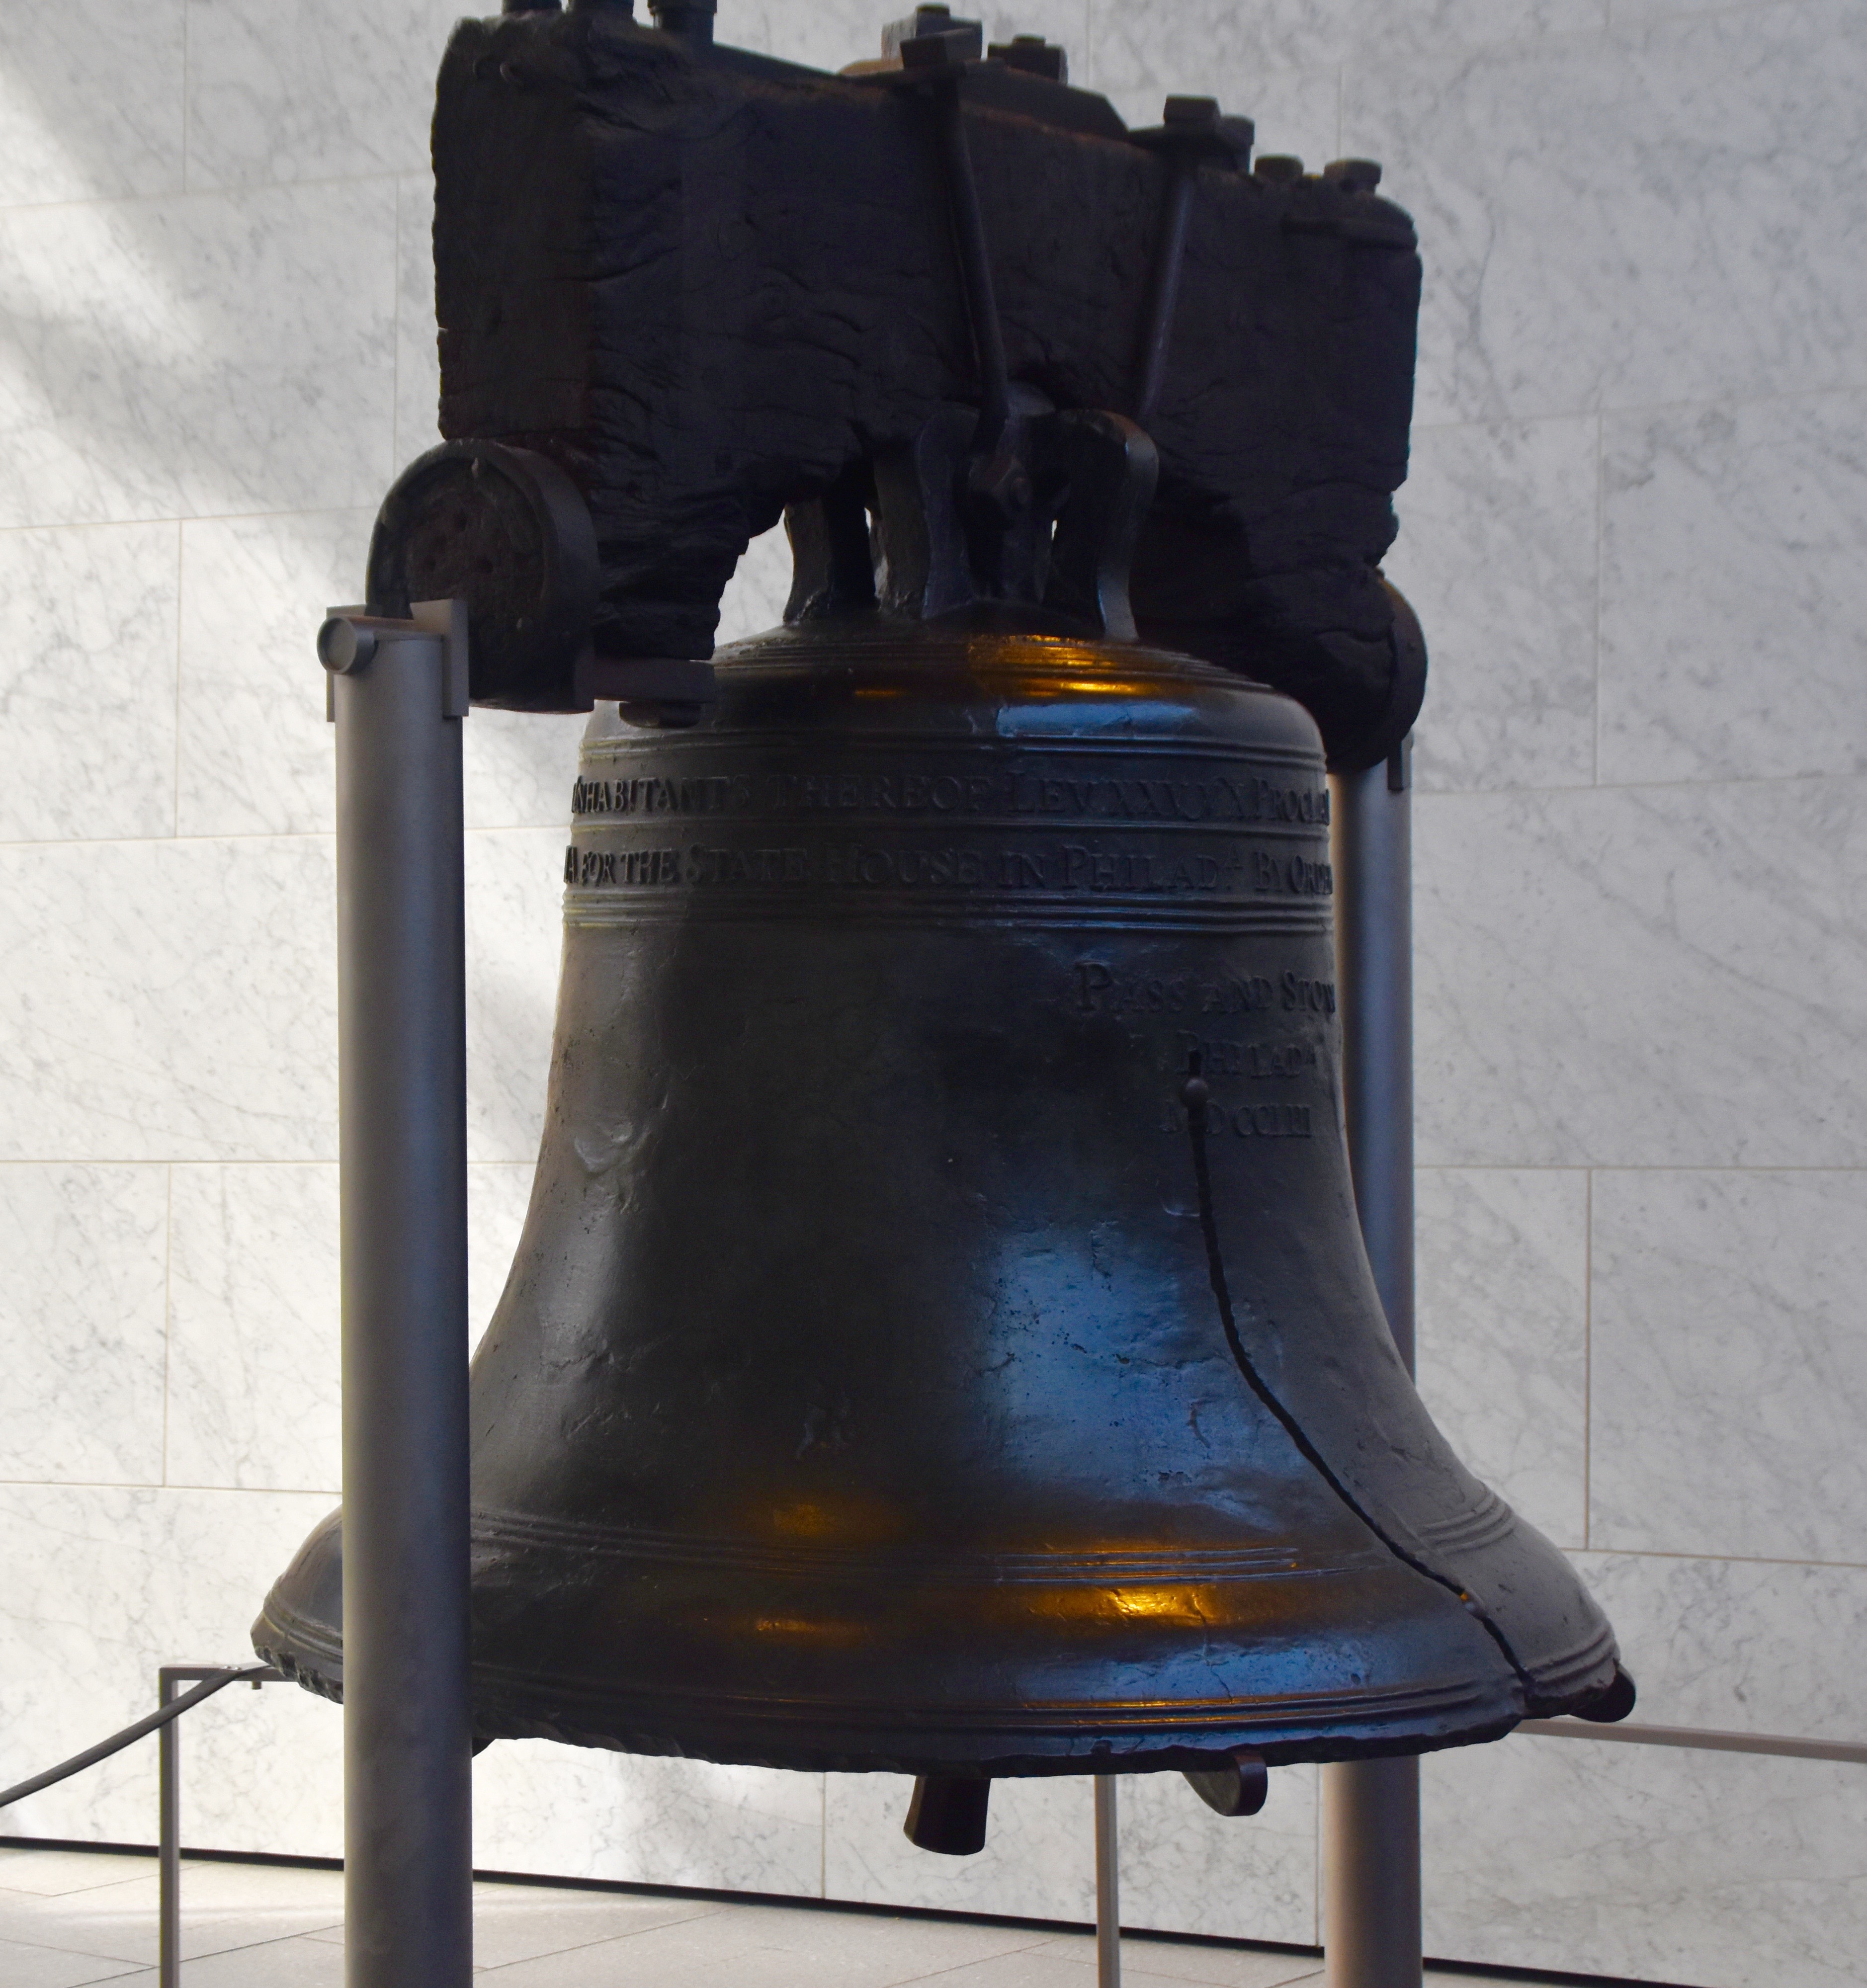 Liberty Bell, Independence National Historic Site